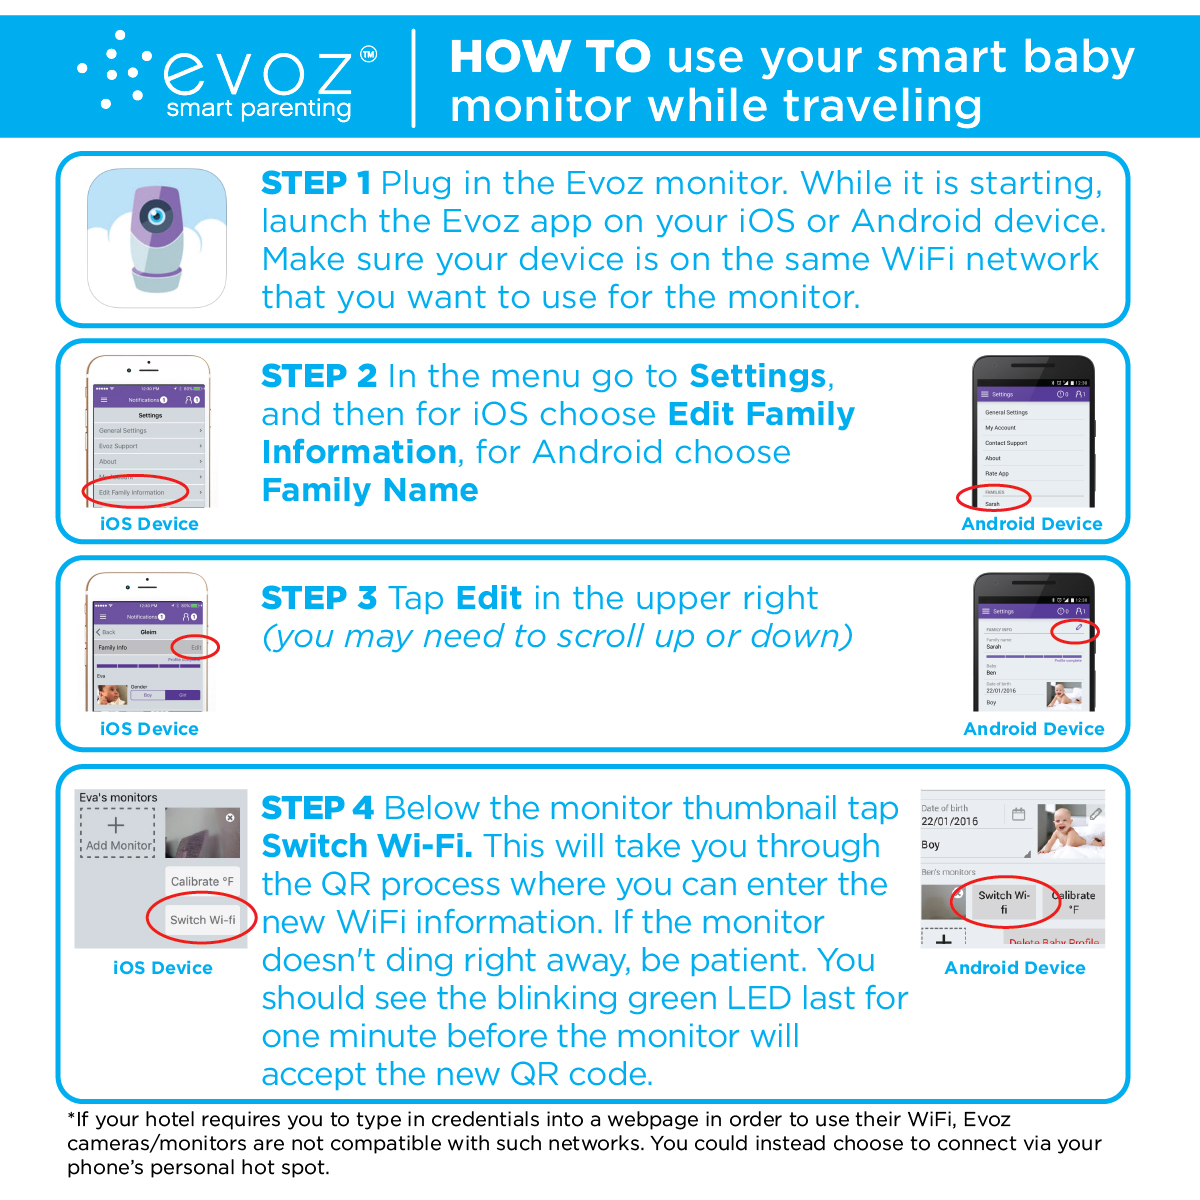 Traveling with your Evoz Smart Baby Monitor